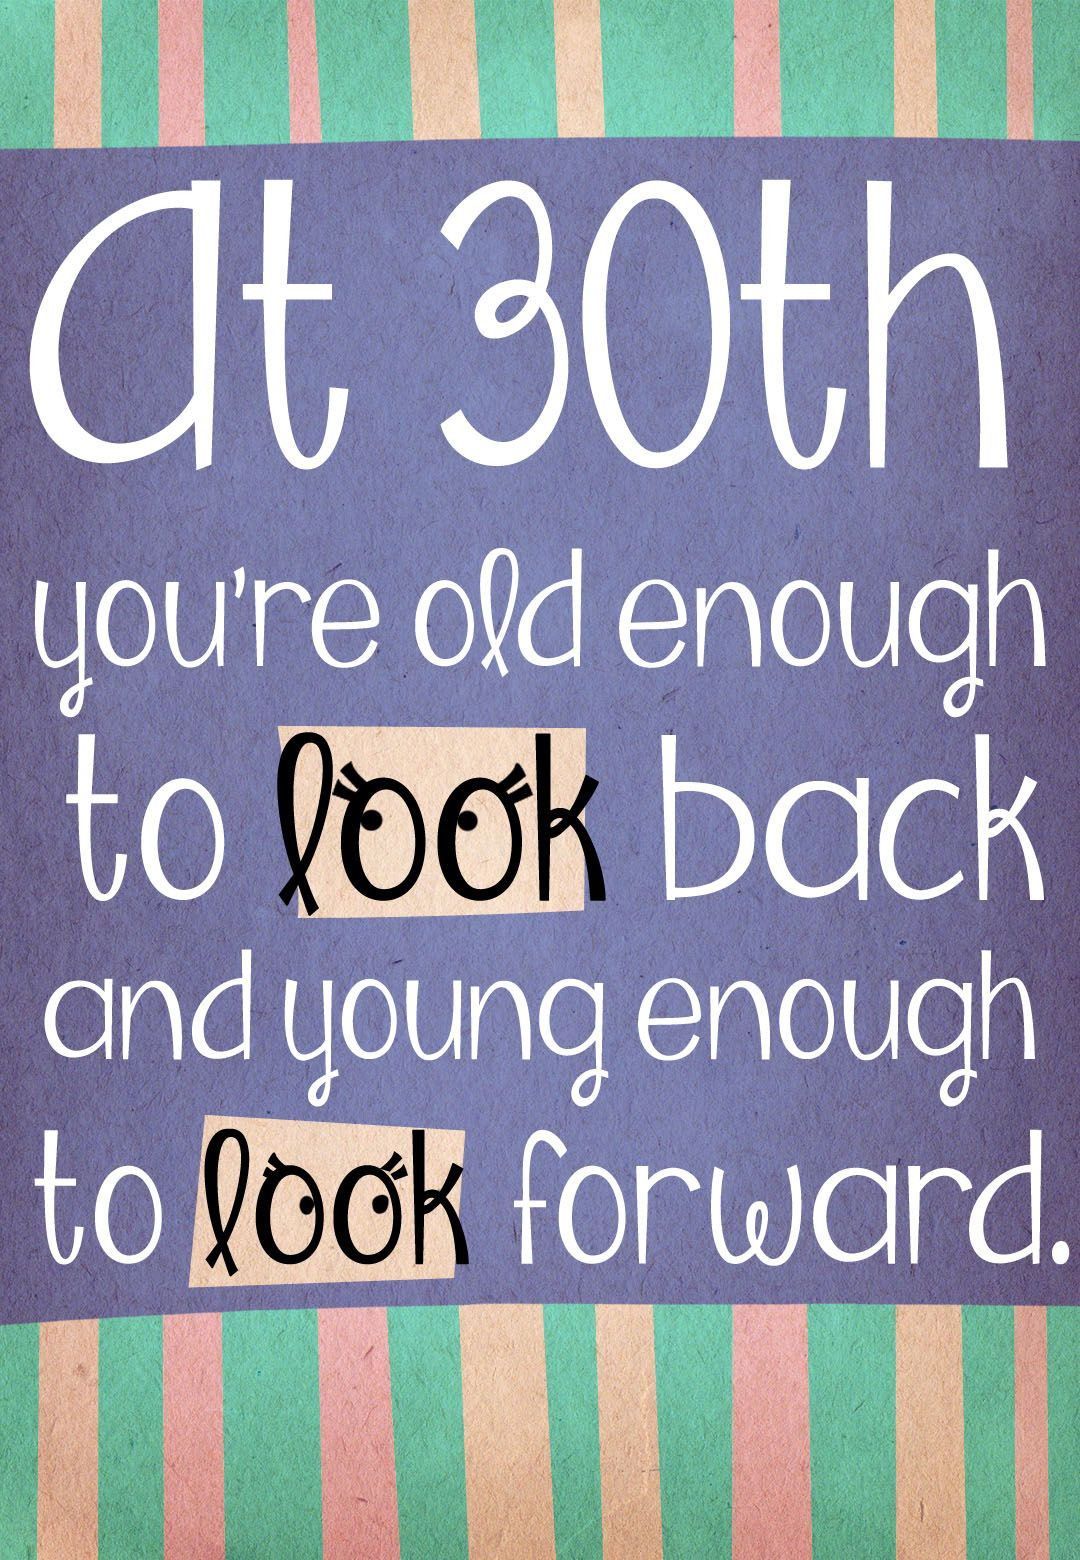 22-of-the-best-ideas-for-30th-birthday-card-messages-home-family